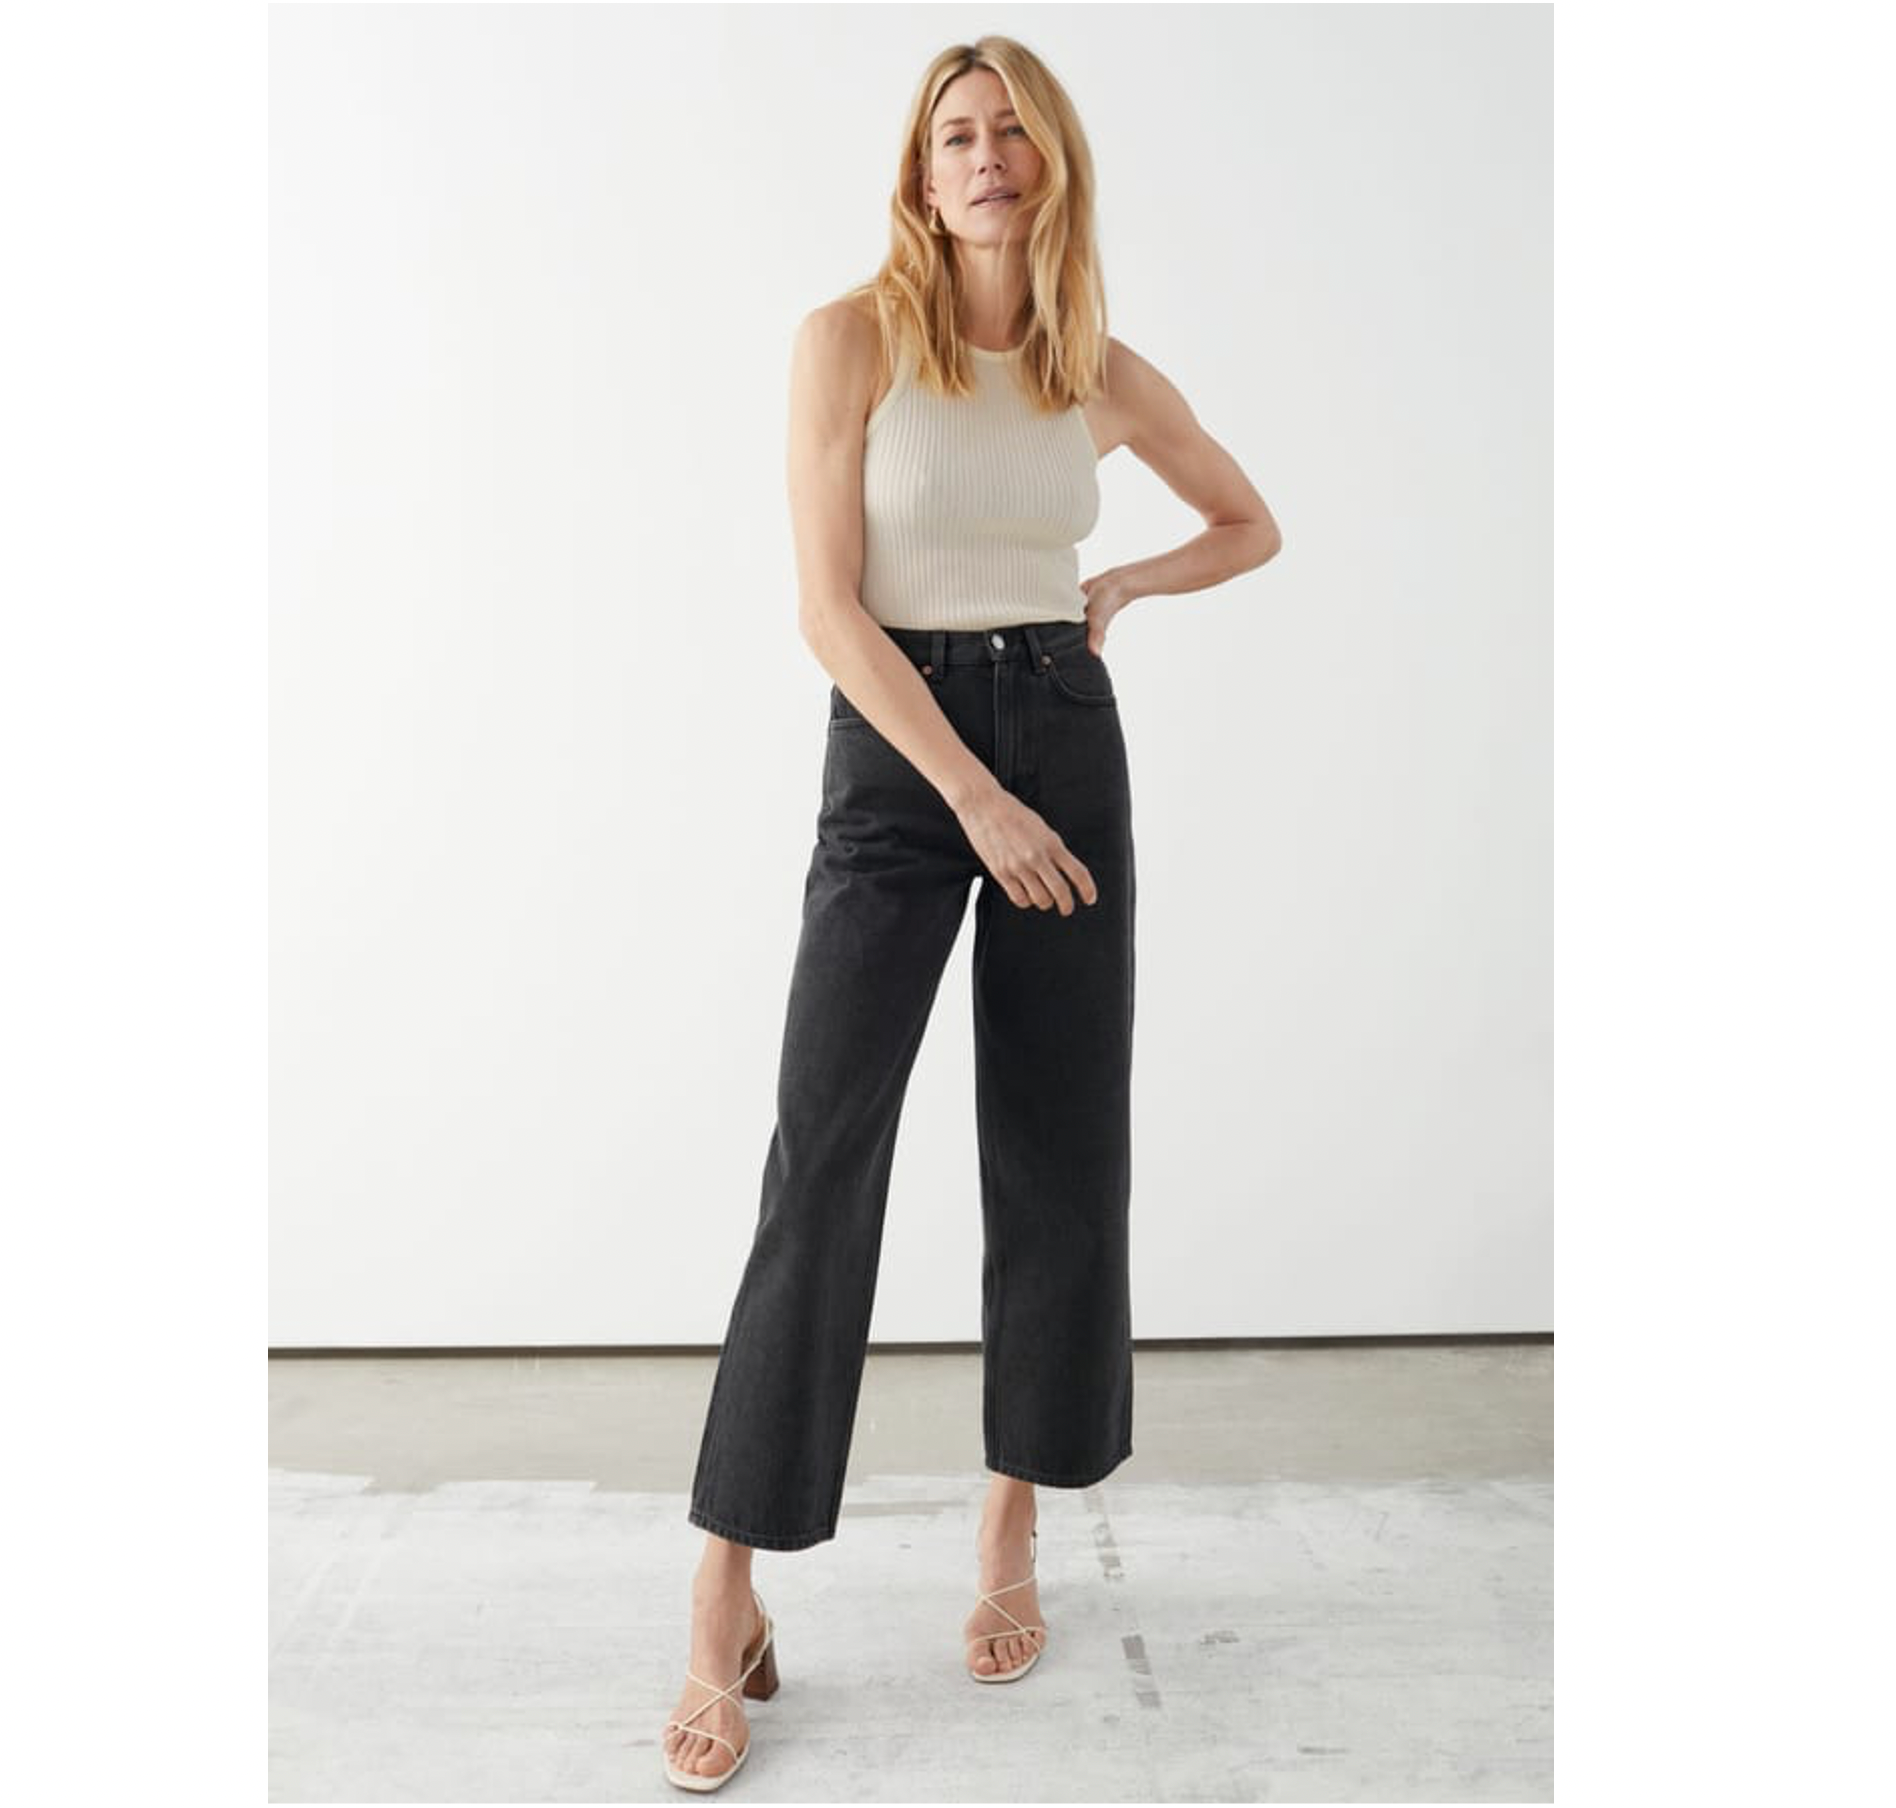 & Other Stories black high waisted straight leg jeans Manifesto Woman